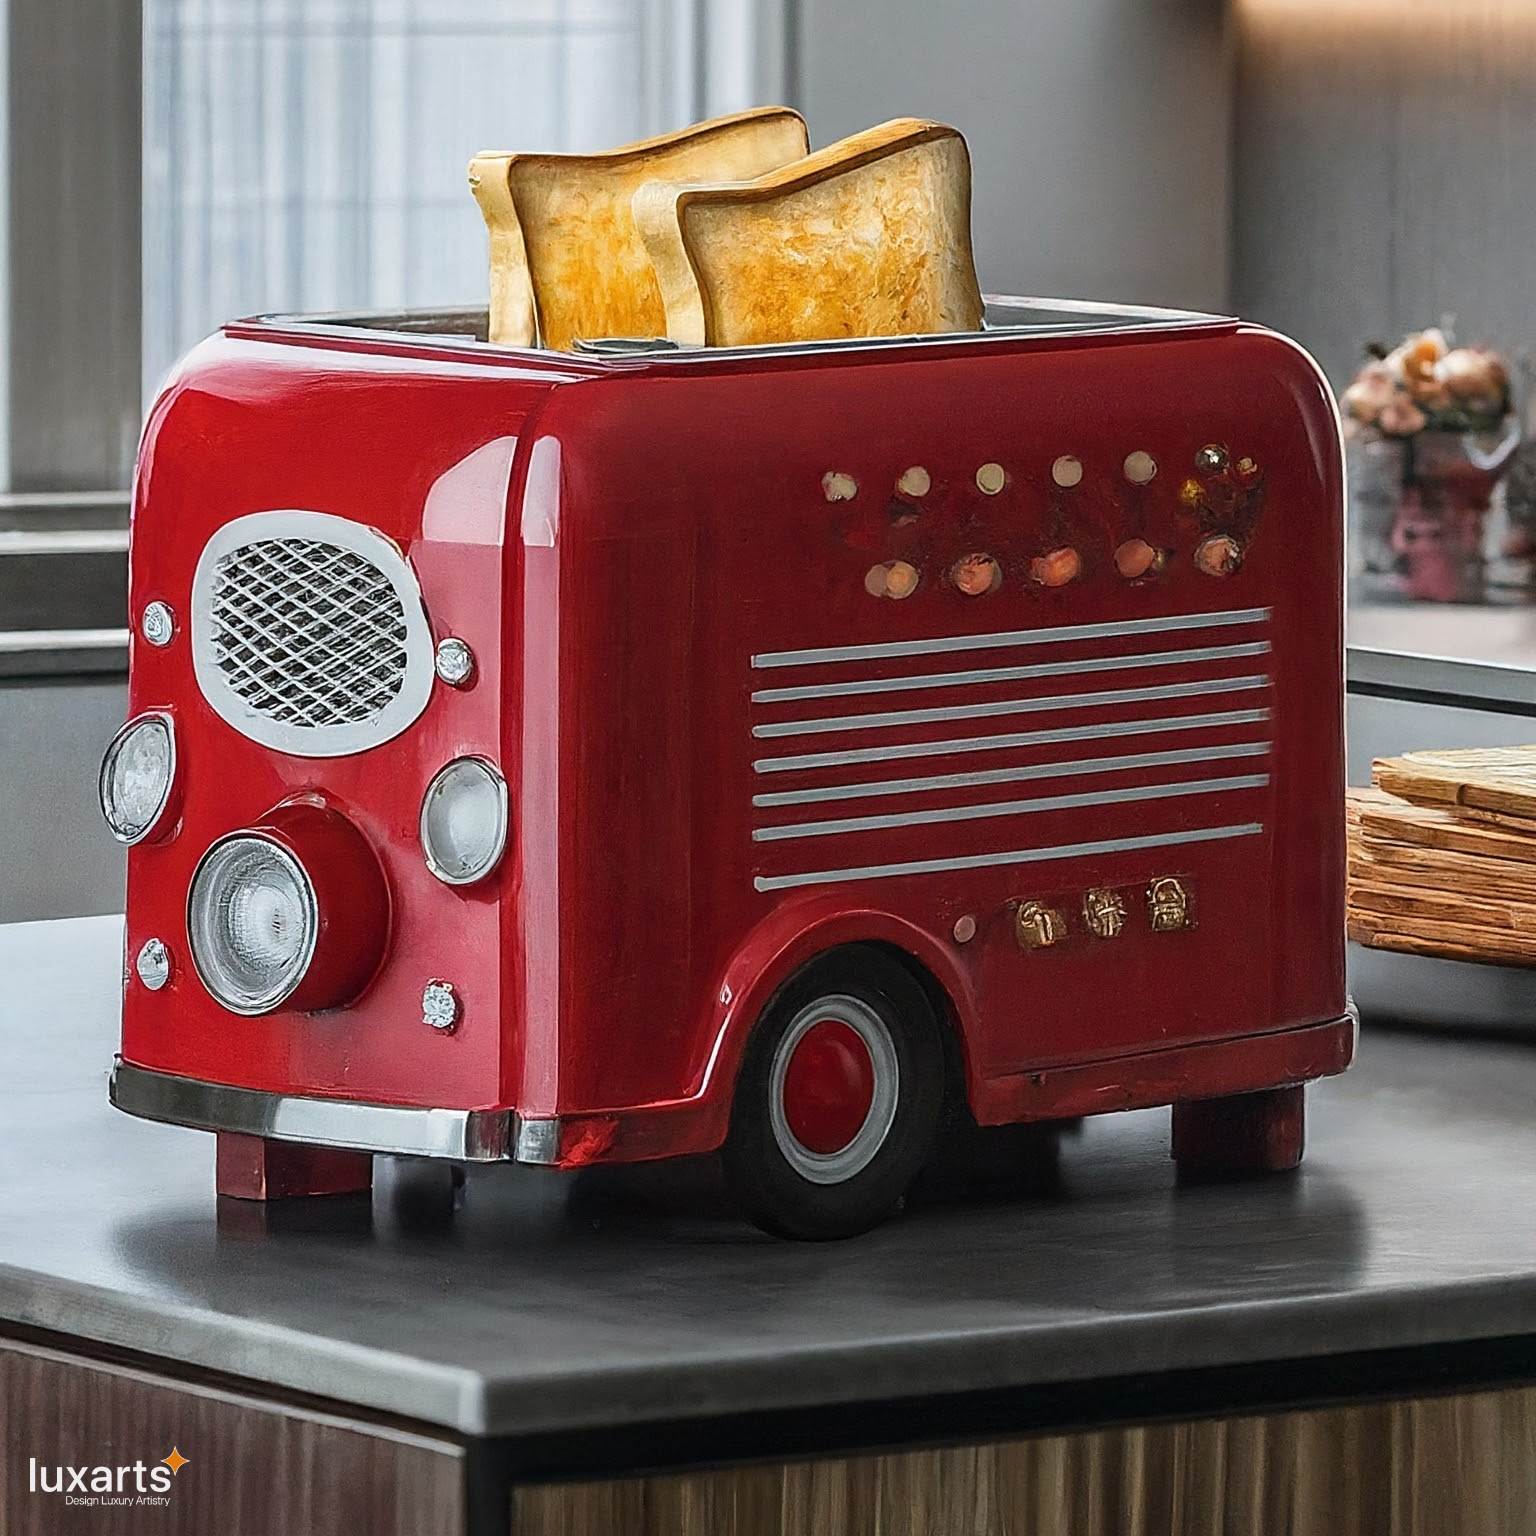 Fire Truck Shaped Toaster: Adding Fun to Your Kitchen luxarts fire truck toaster 2